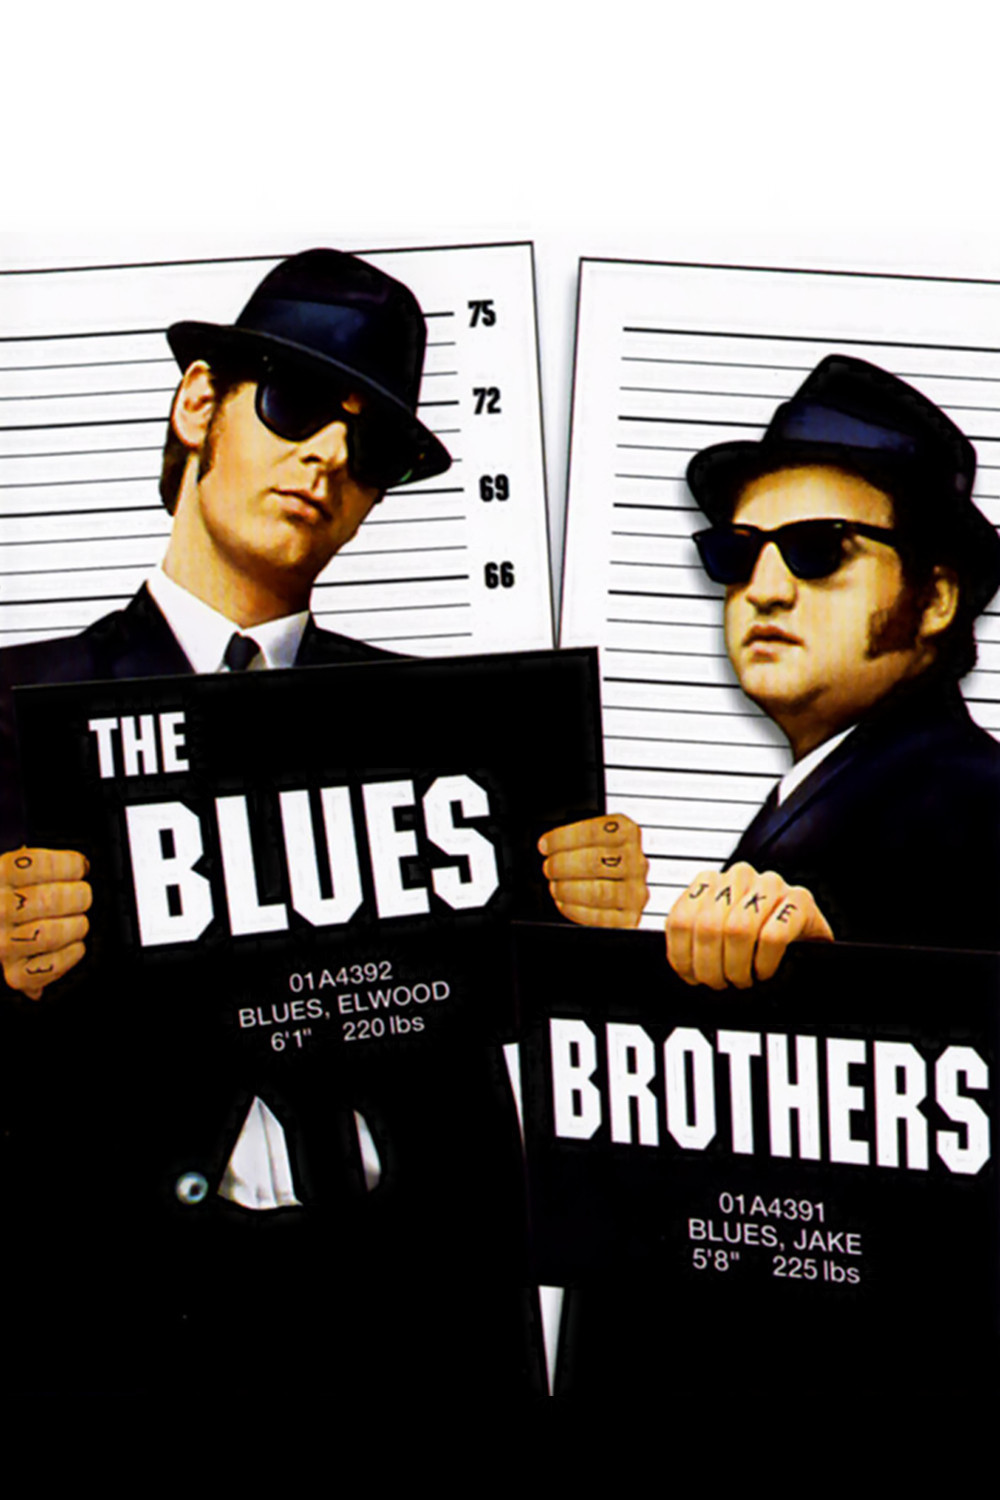 Poster for the movie "The Blues Brothers"